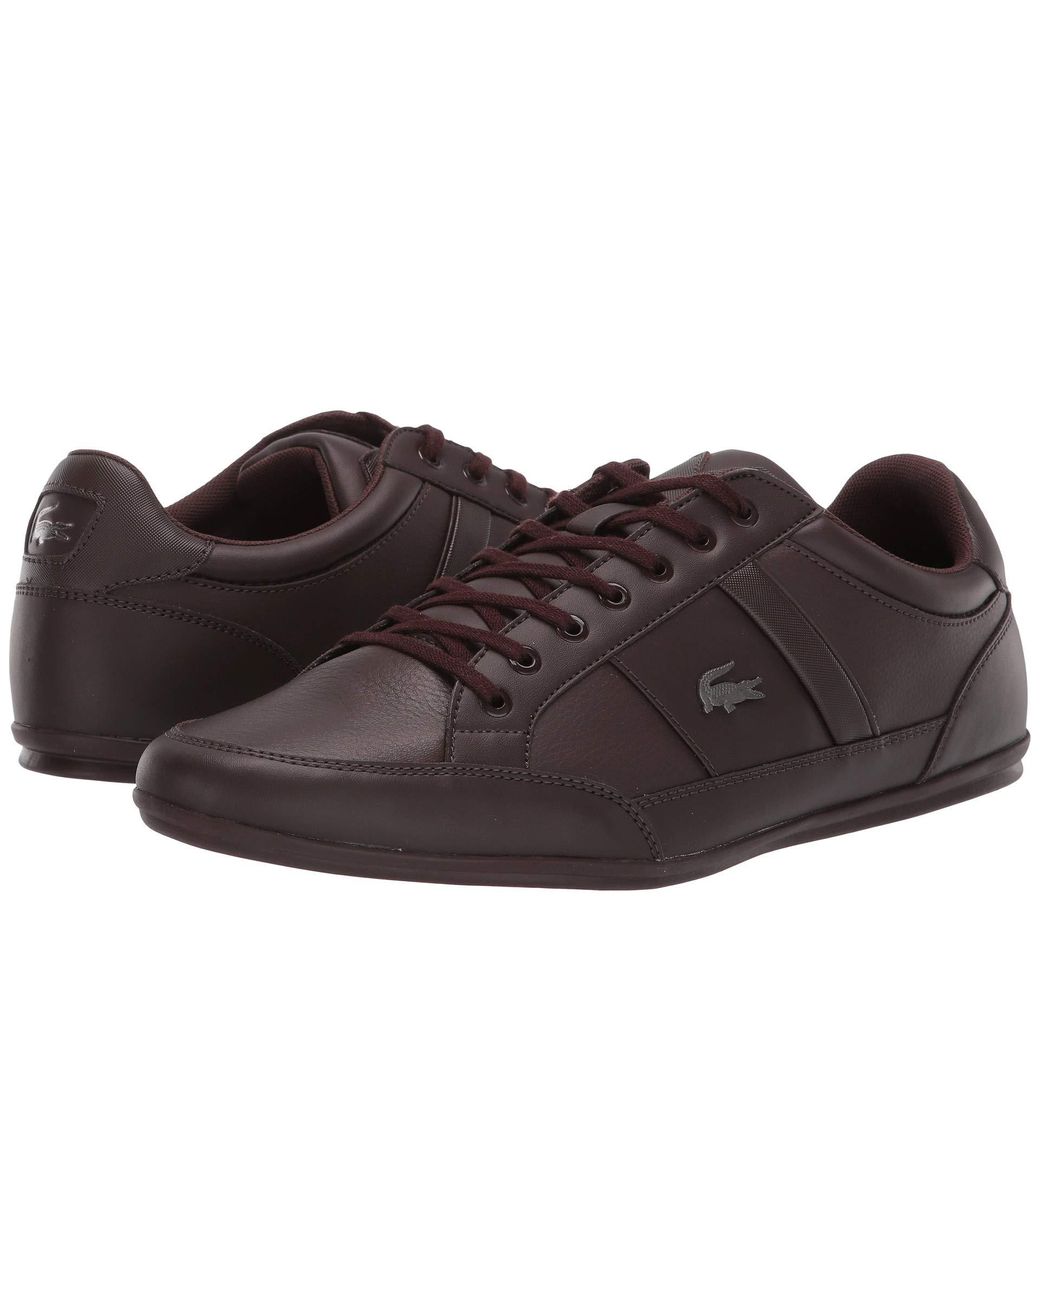 Lacoste Leather Chaymon Bl 1 in Brown for Men - Lyst